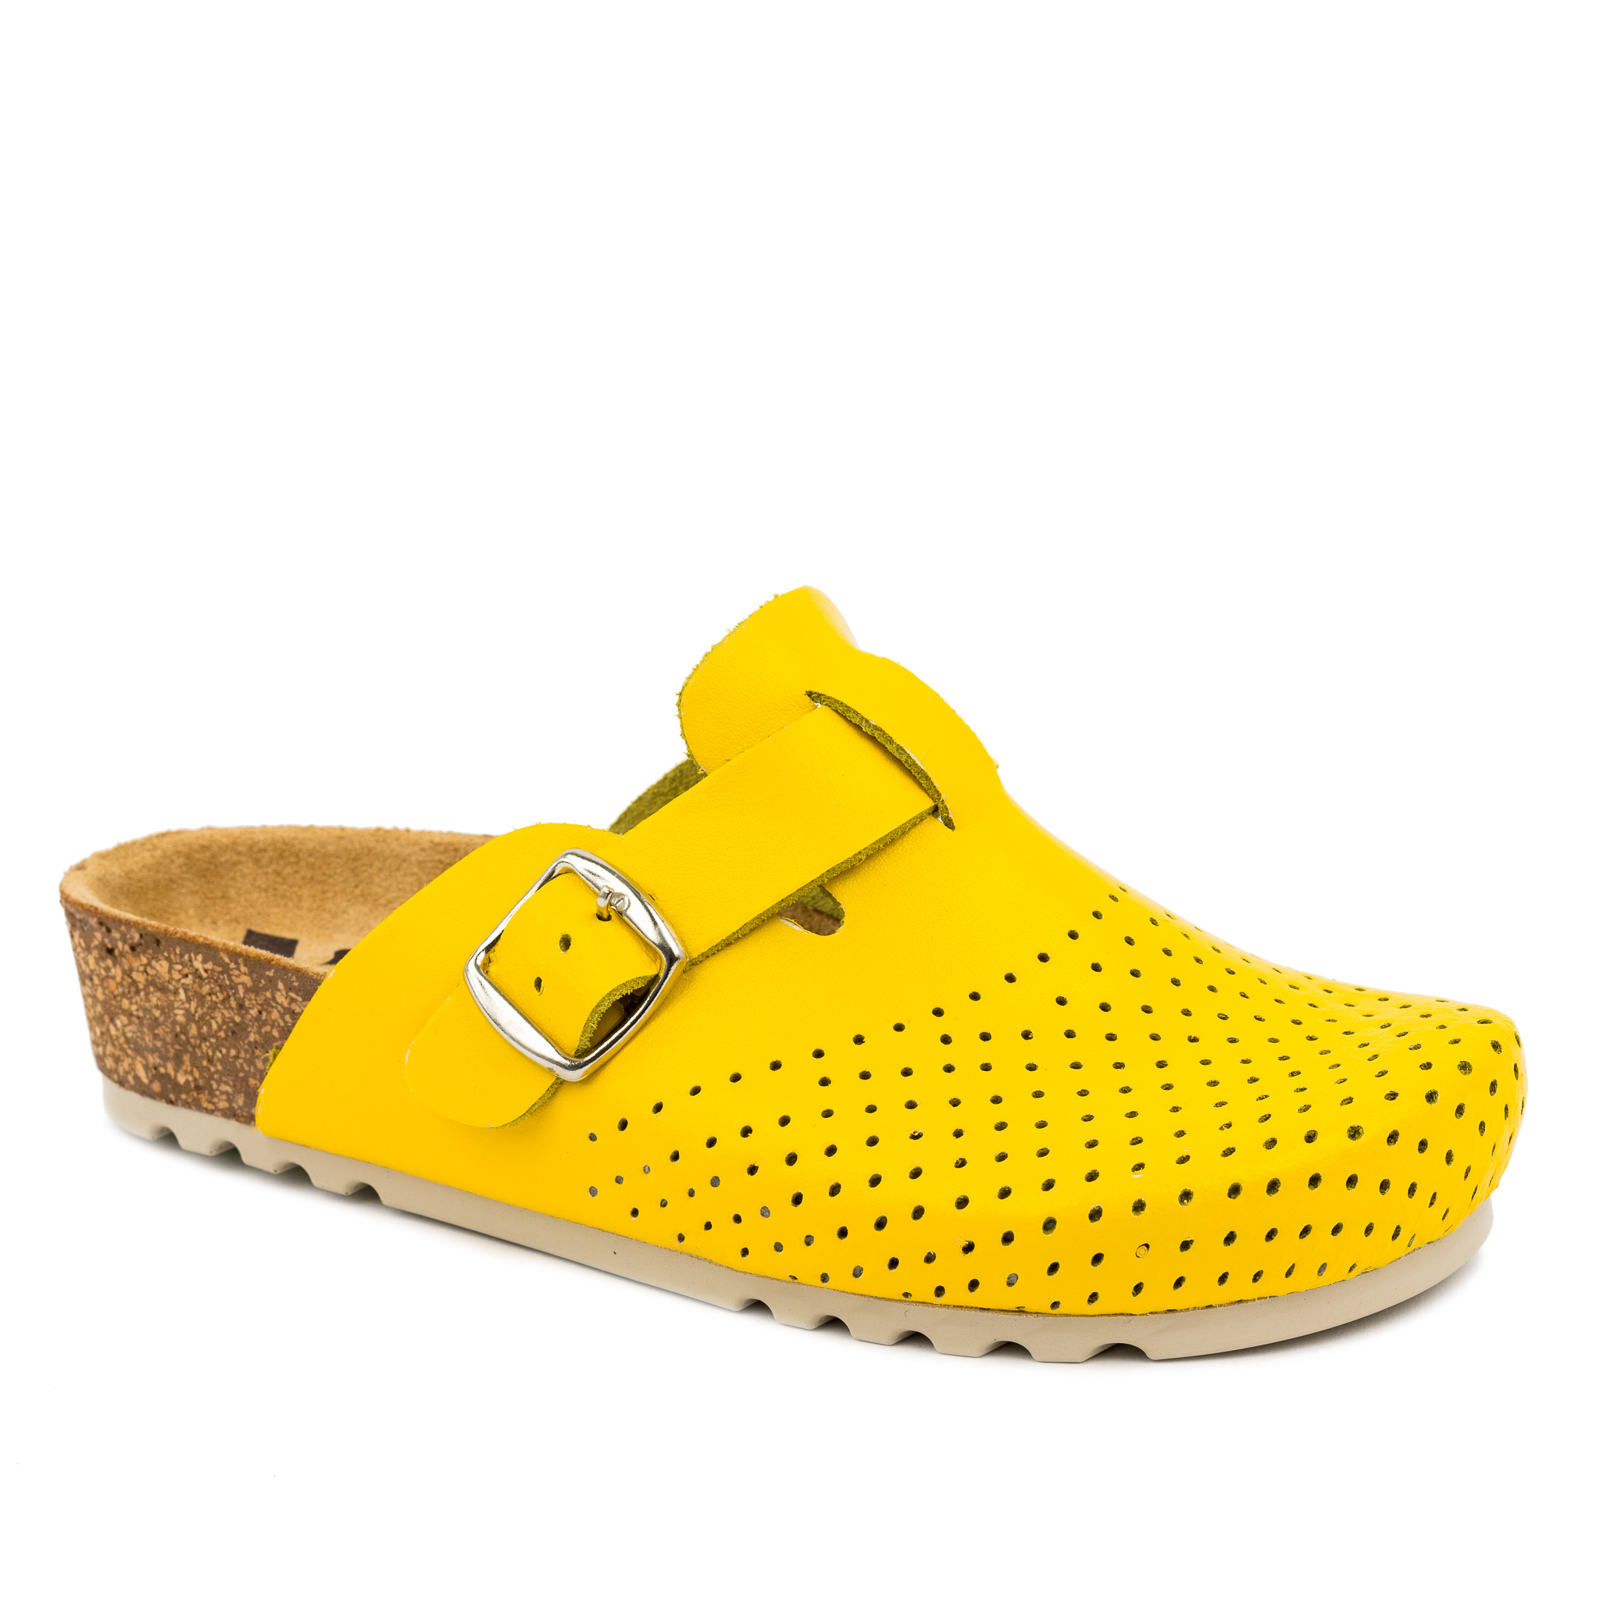 LEATHER ANATOMIC CLOGS WITH VELCRO BAND - YELLOW